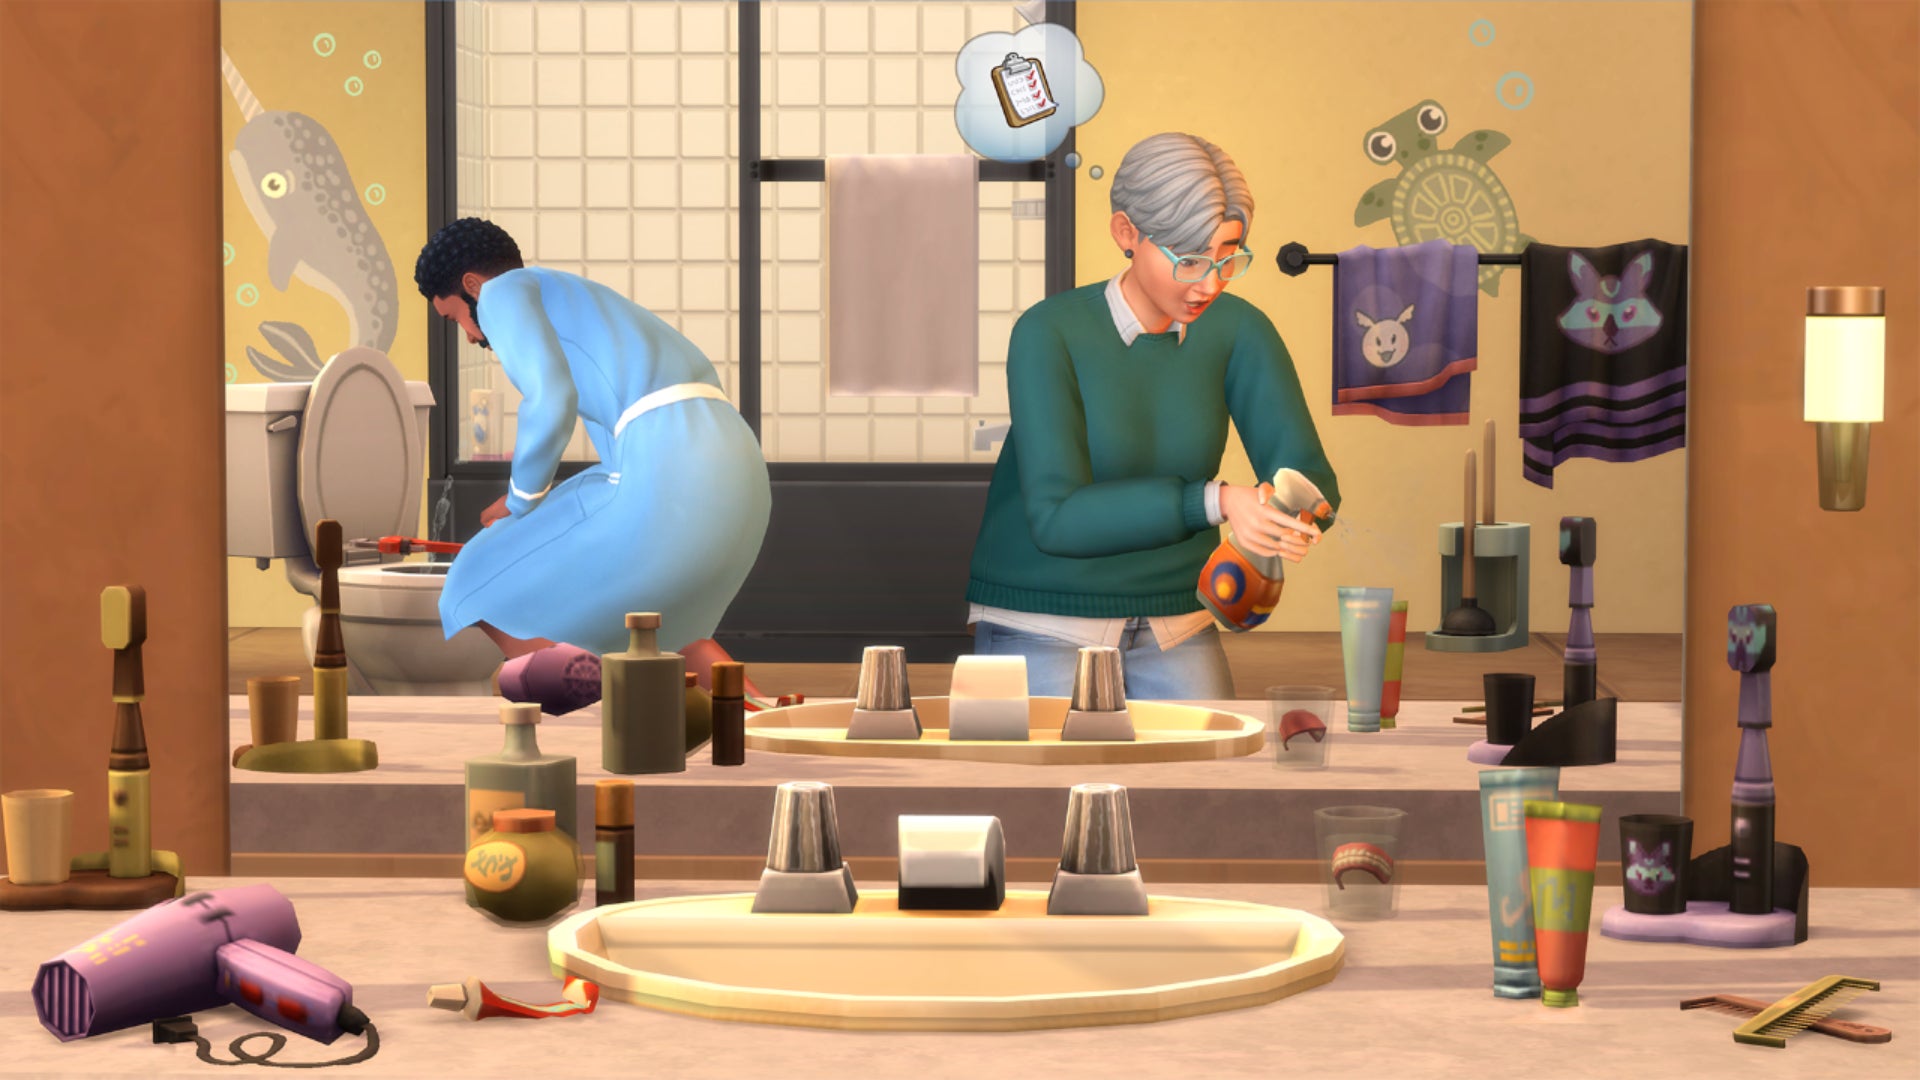 An asset showing two Sims tidying their bathroom in The Sims 4 Bathroom Clutter Kit